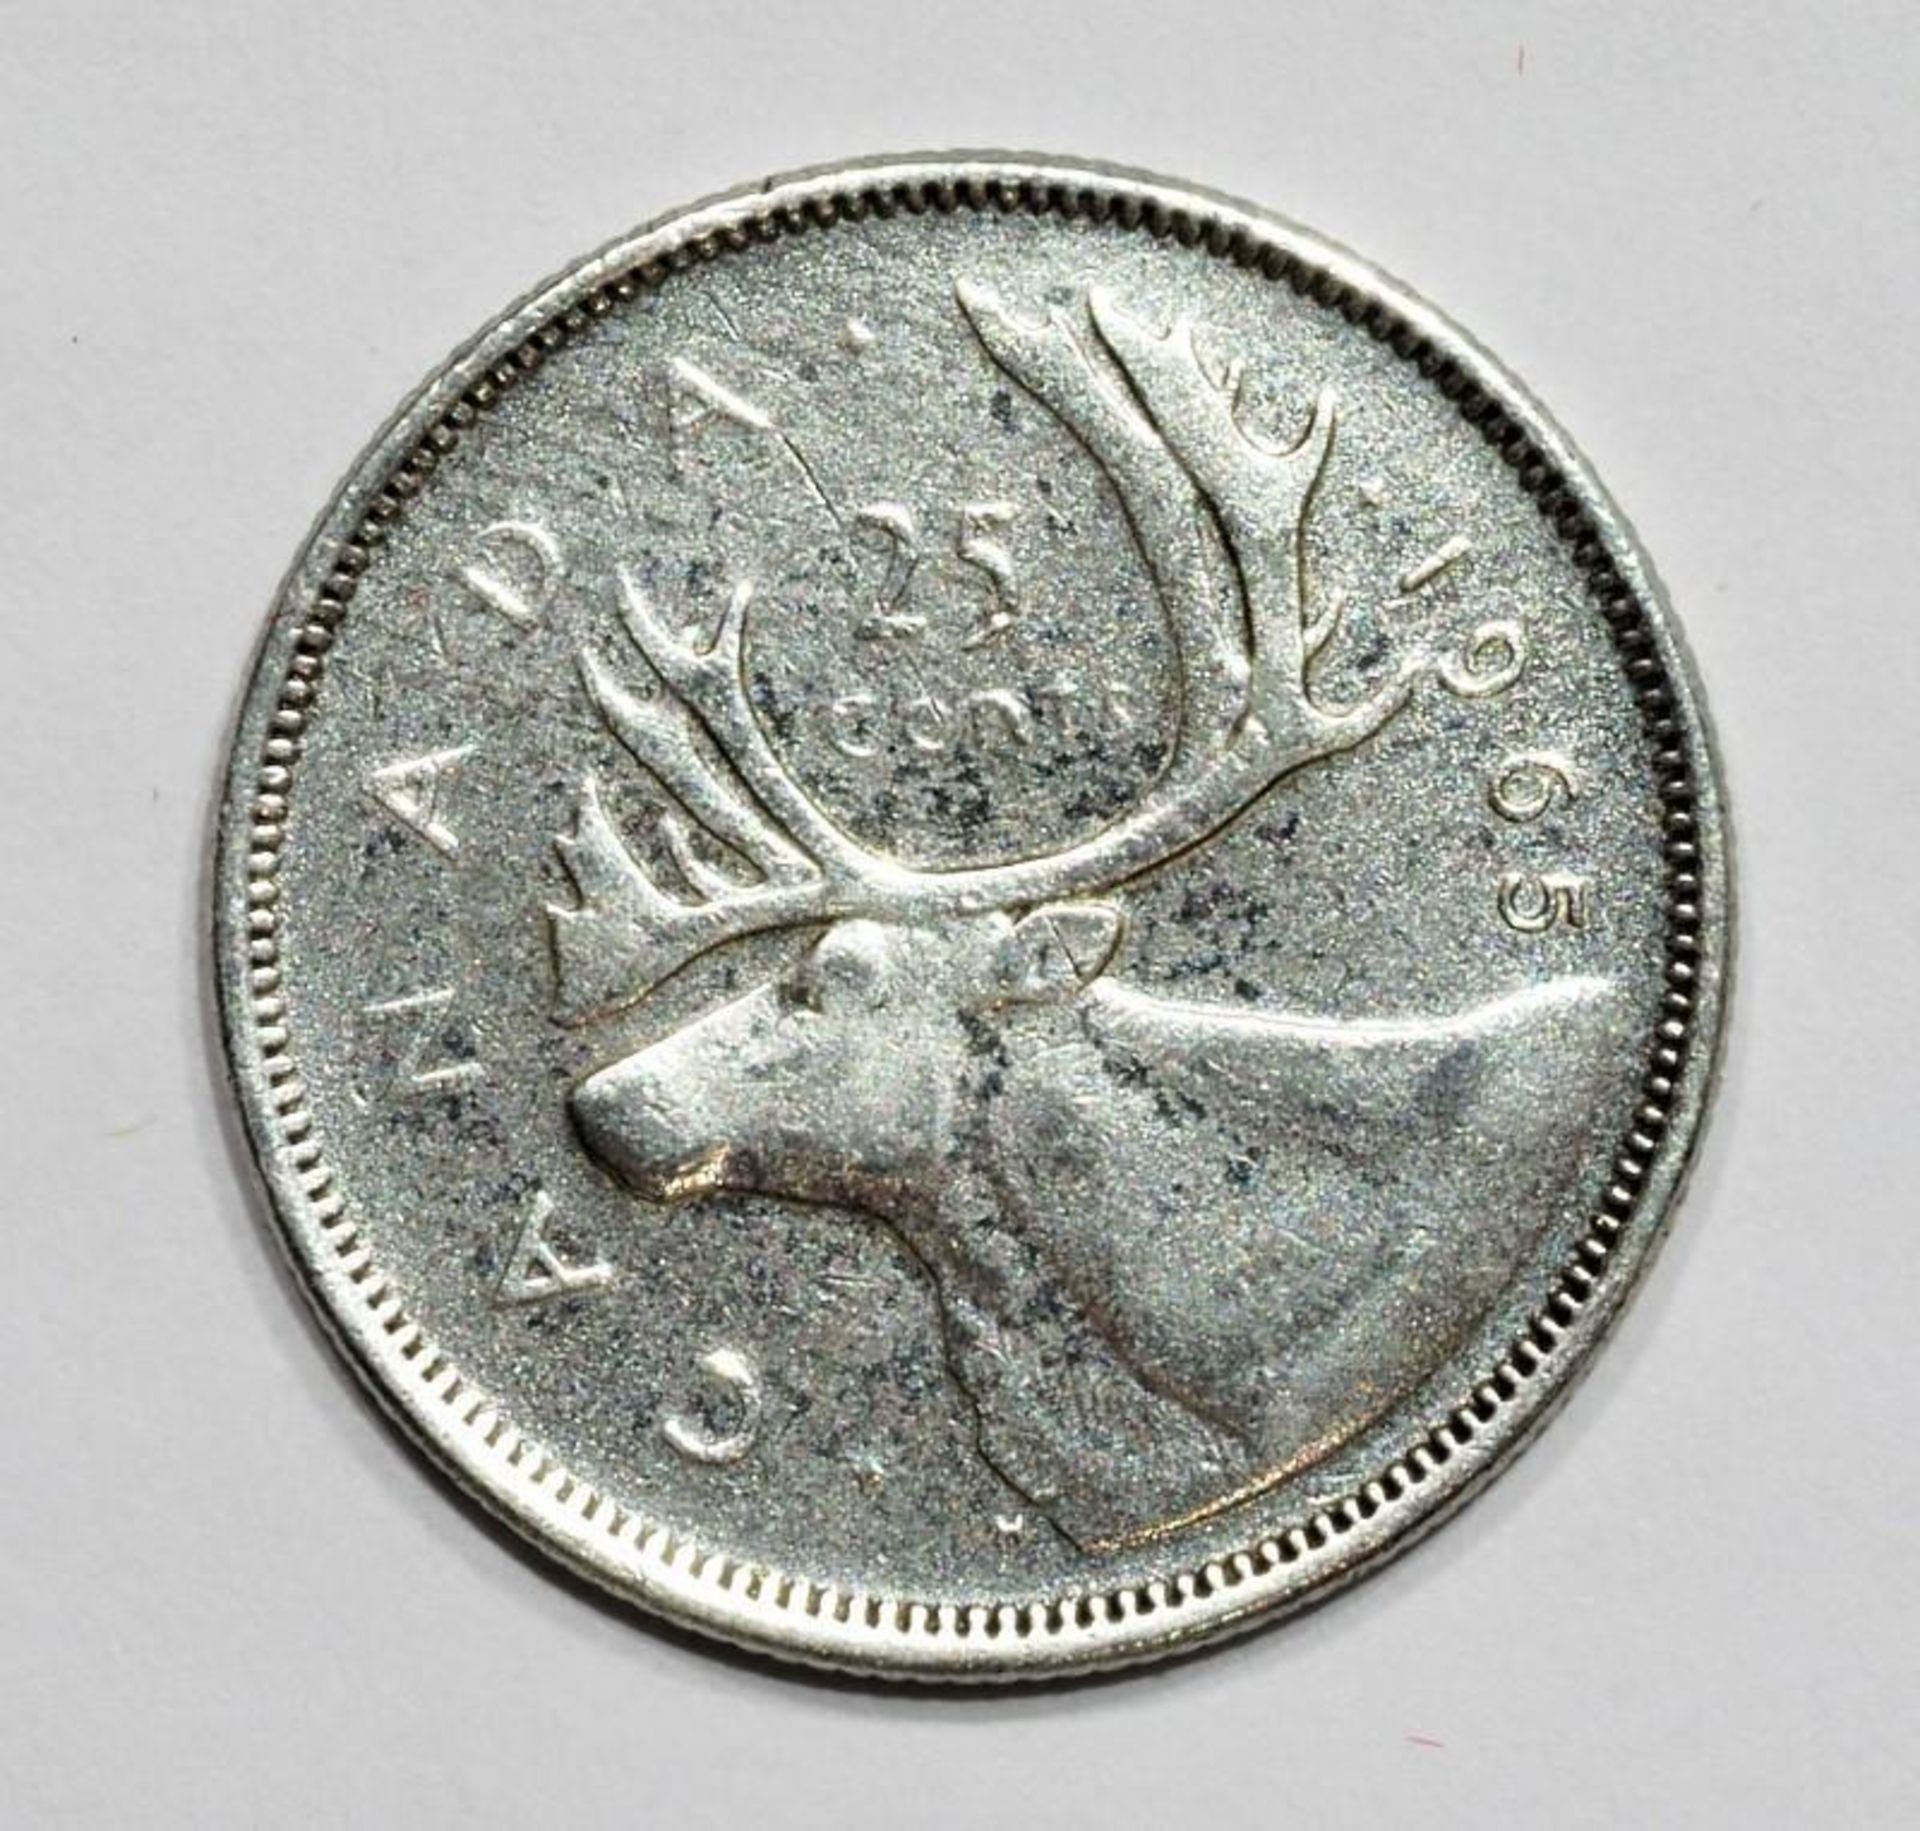 Silver Canadian Quarter, Retail $60 (MS19 - 44) - Image 2 of 3